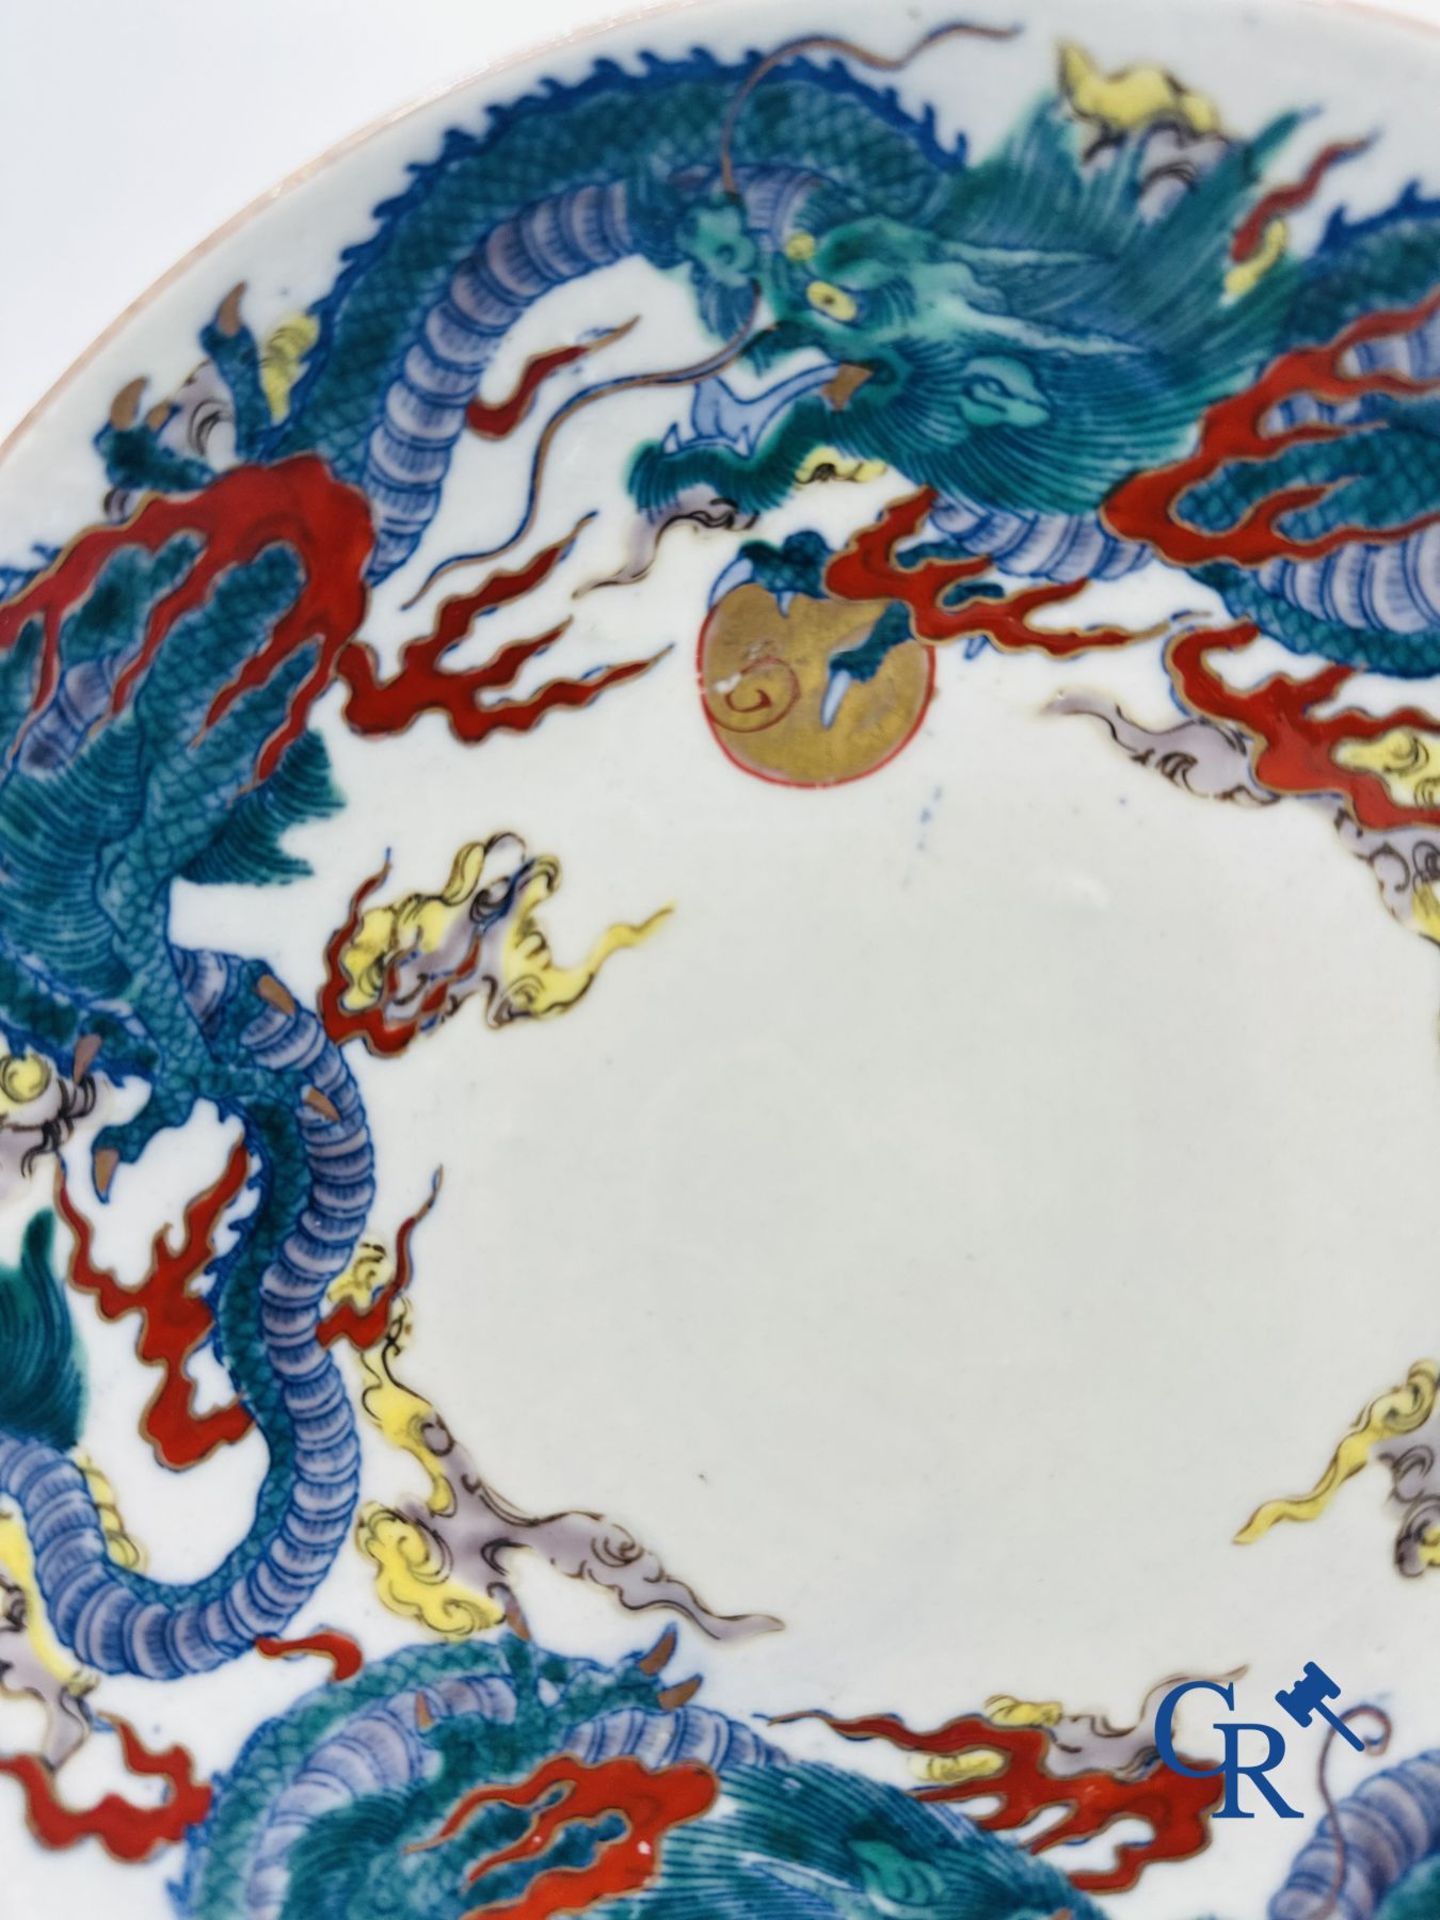 Chinese Porcelain: Lot of 6 different pieces of Chinese porcelain. 18th and 19th century. - Image 4 of 11